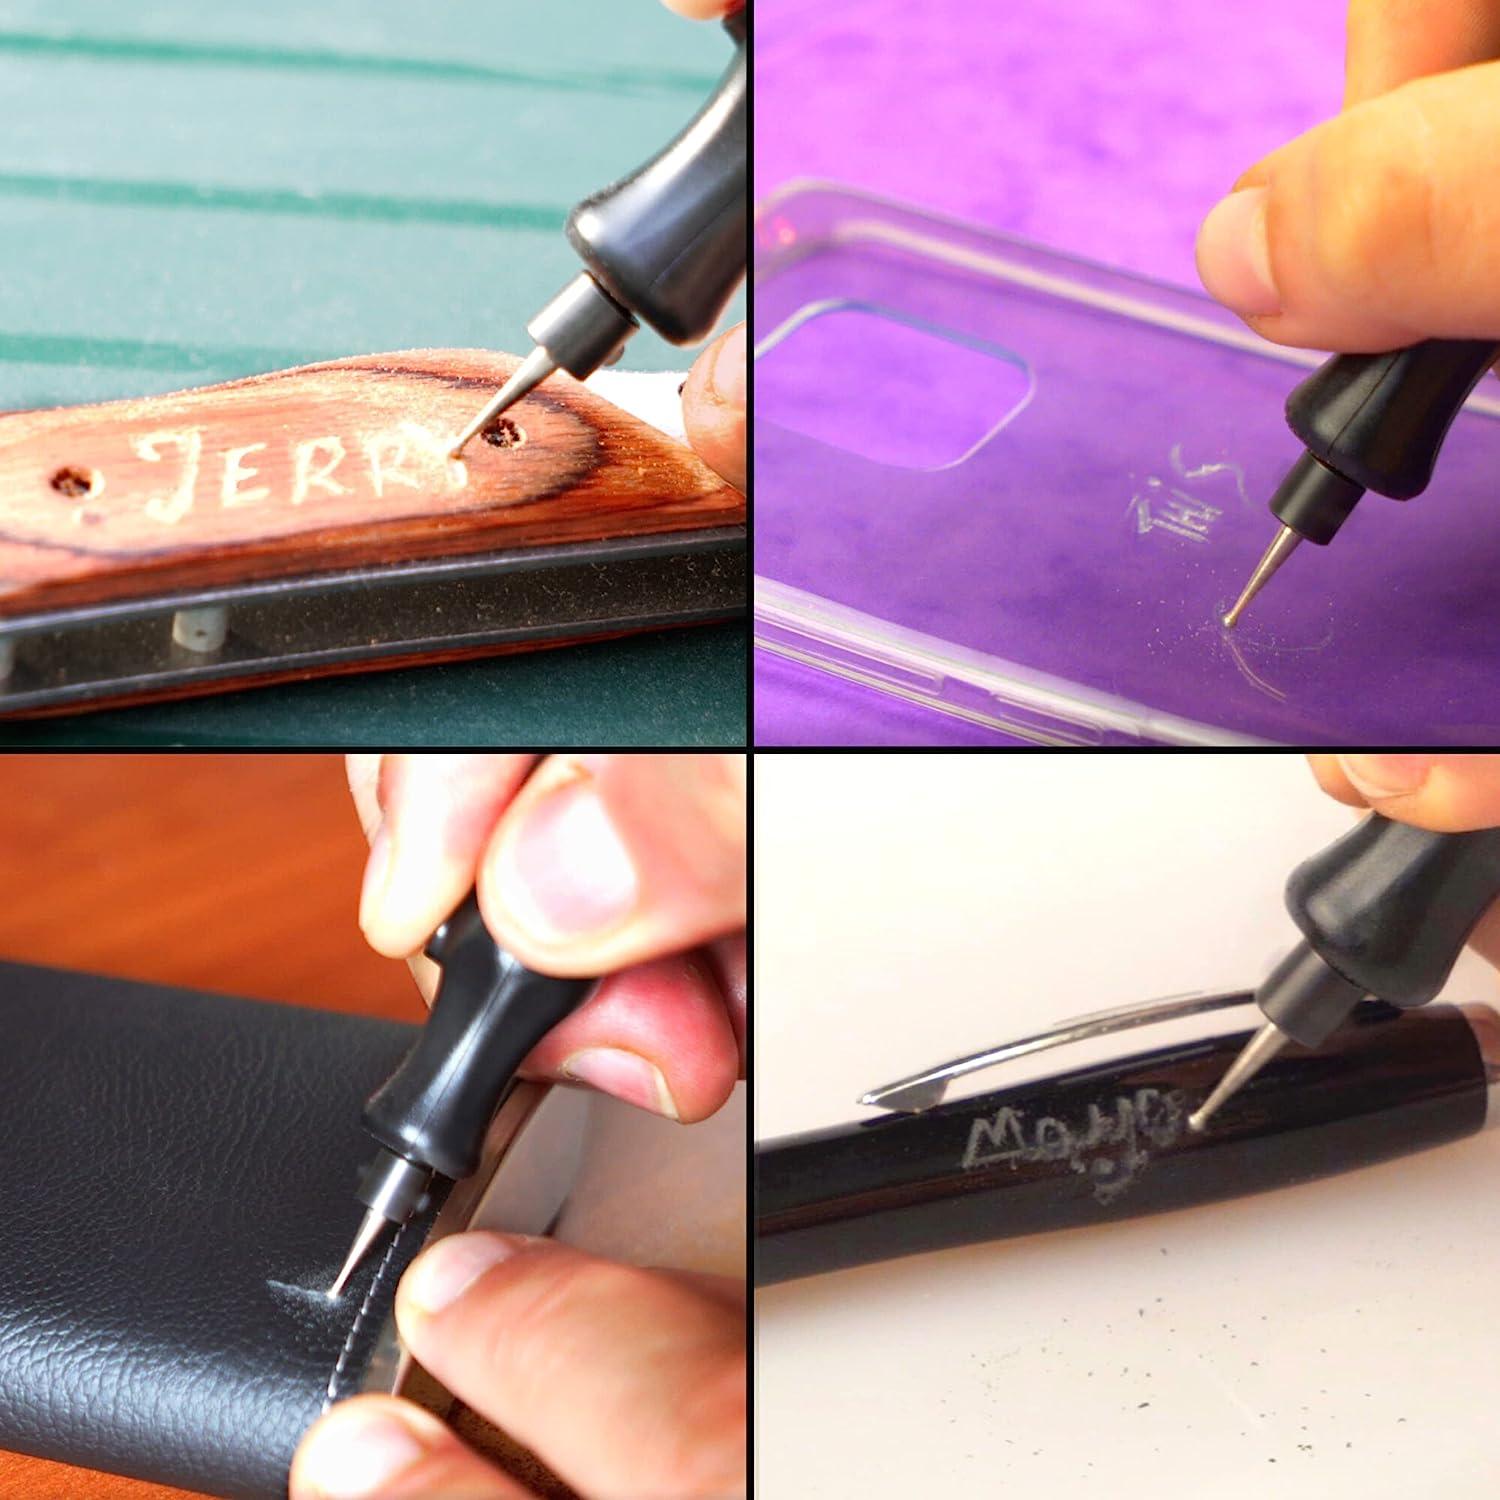 Micro Electric Engraver Pen Tool Mini DIY Engraving Machine Kit Rotary Tool  for Metal Glass Wood Jewelry Engraving Lettering Pen - AliExpress